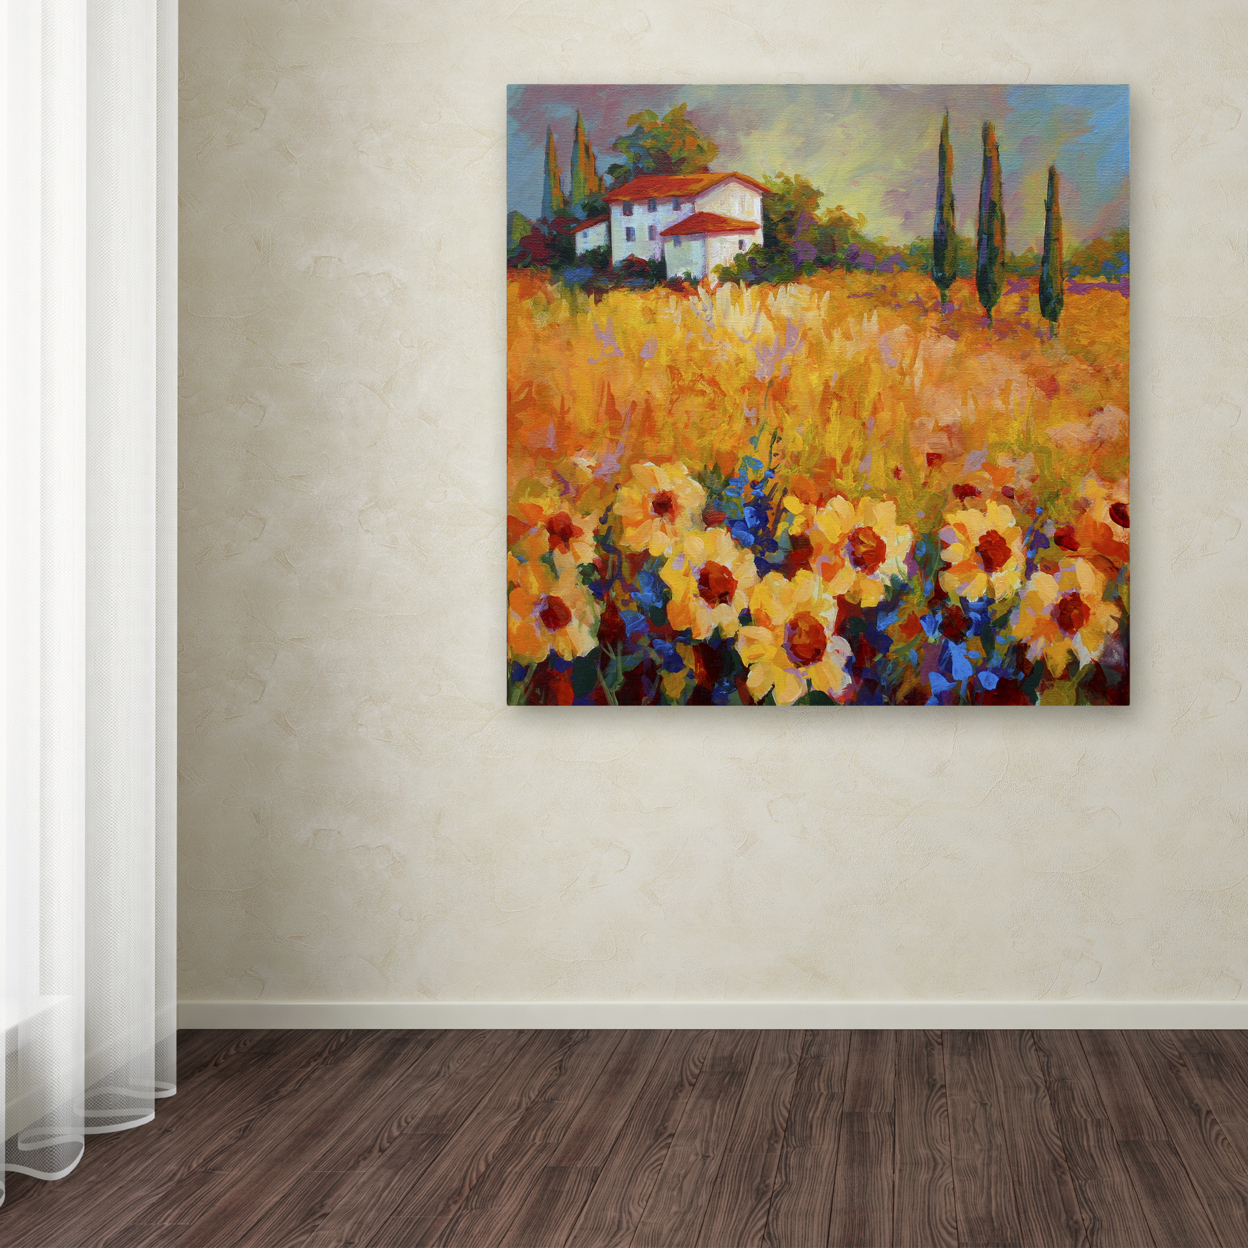 Marion Rose 'Tuscan Sunflowers' Ready To Hang Canvas Art 14 X 14 Inches Made In USA